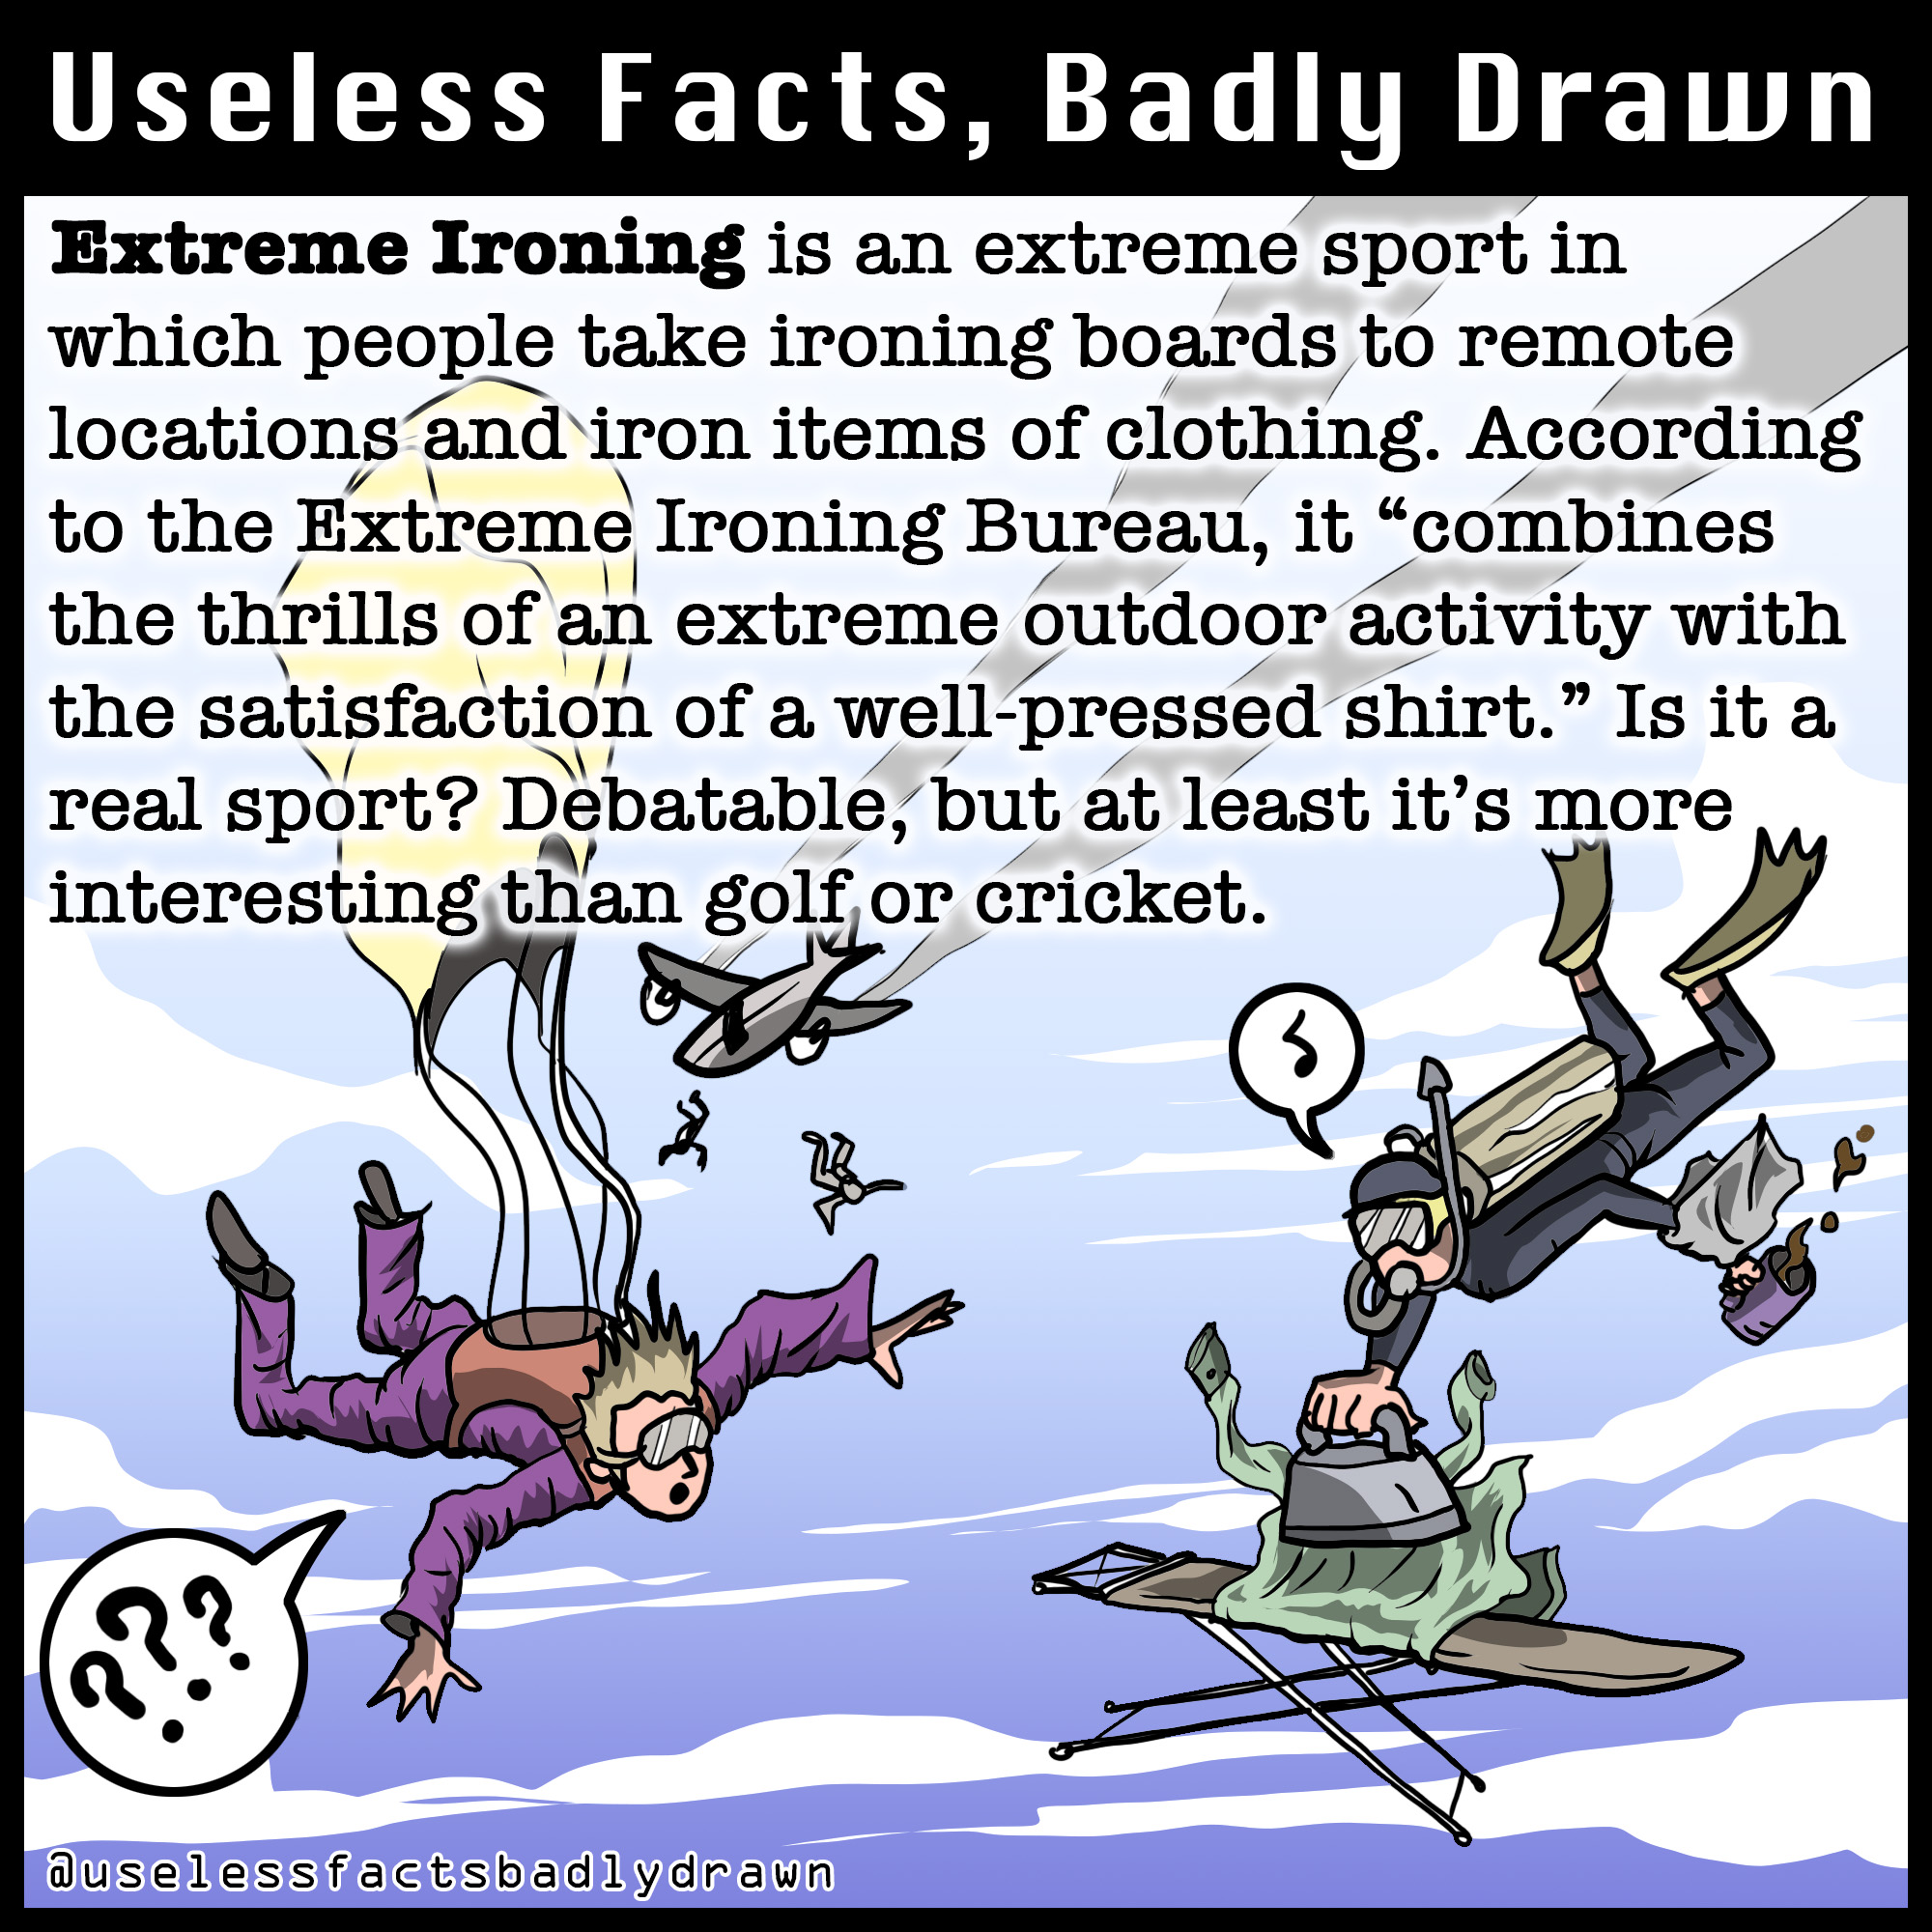 cartoon - Useless Facts, Badly Drawn Extreme Ironing is an extreme sport in which people take ironing boards to remote locations and iron items of clothing. According to the Extreme Ironing Bureau, it "combines the thrills of an extreme outdoor activity w